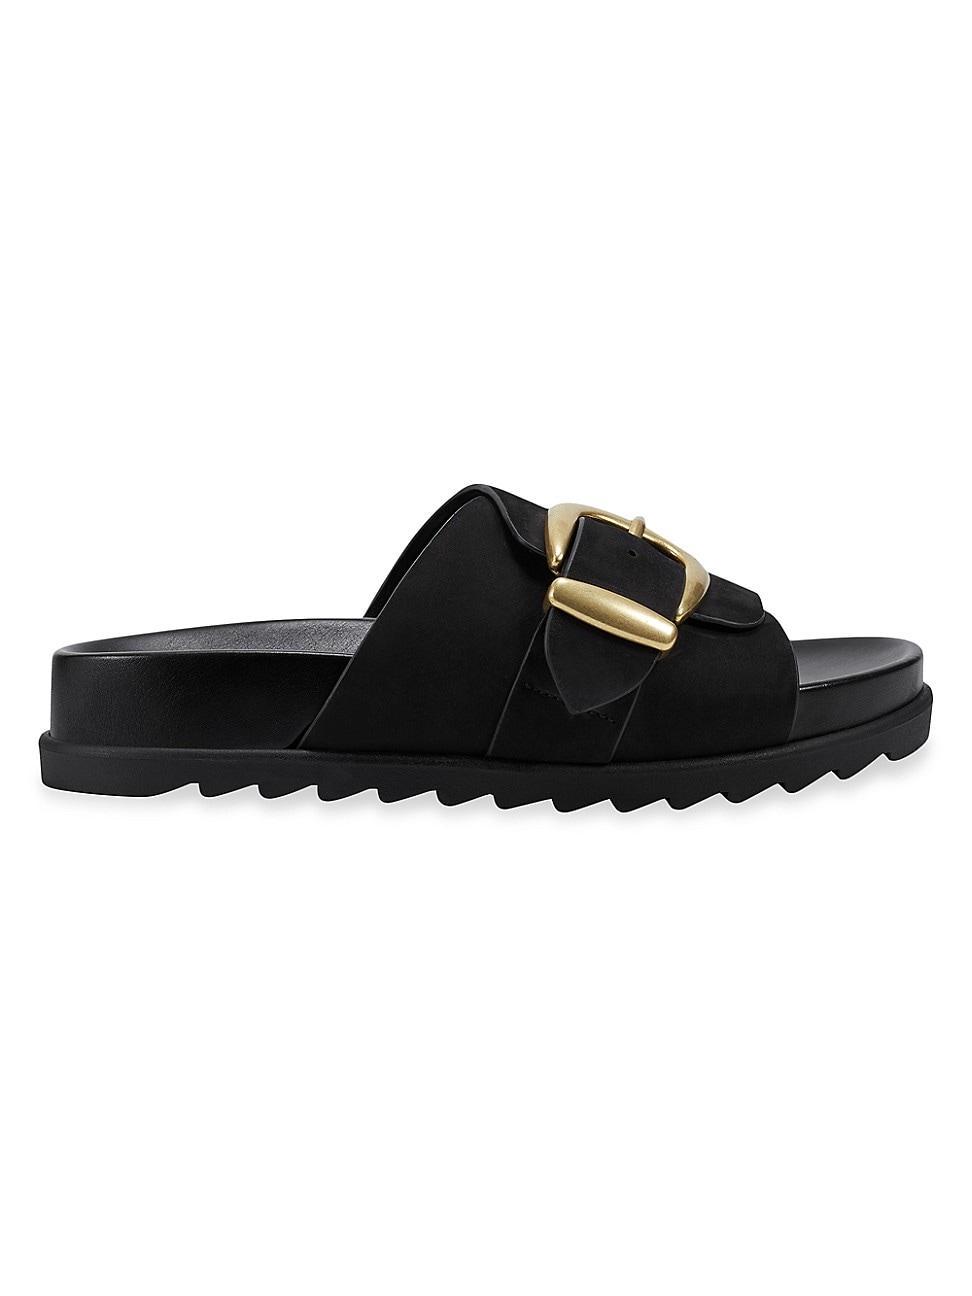 Leather Buckle Easy Slide Sandals Product Image